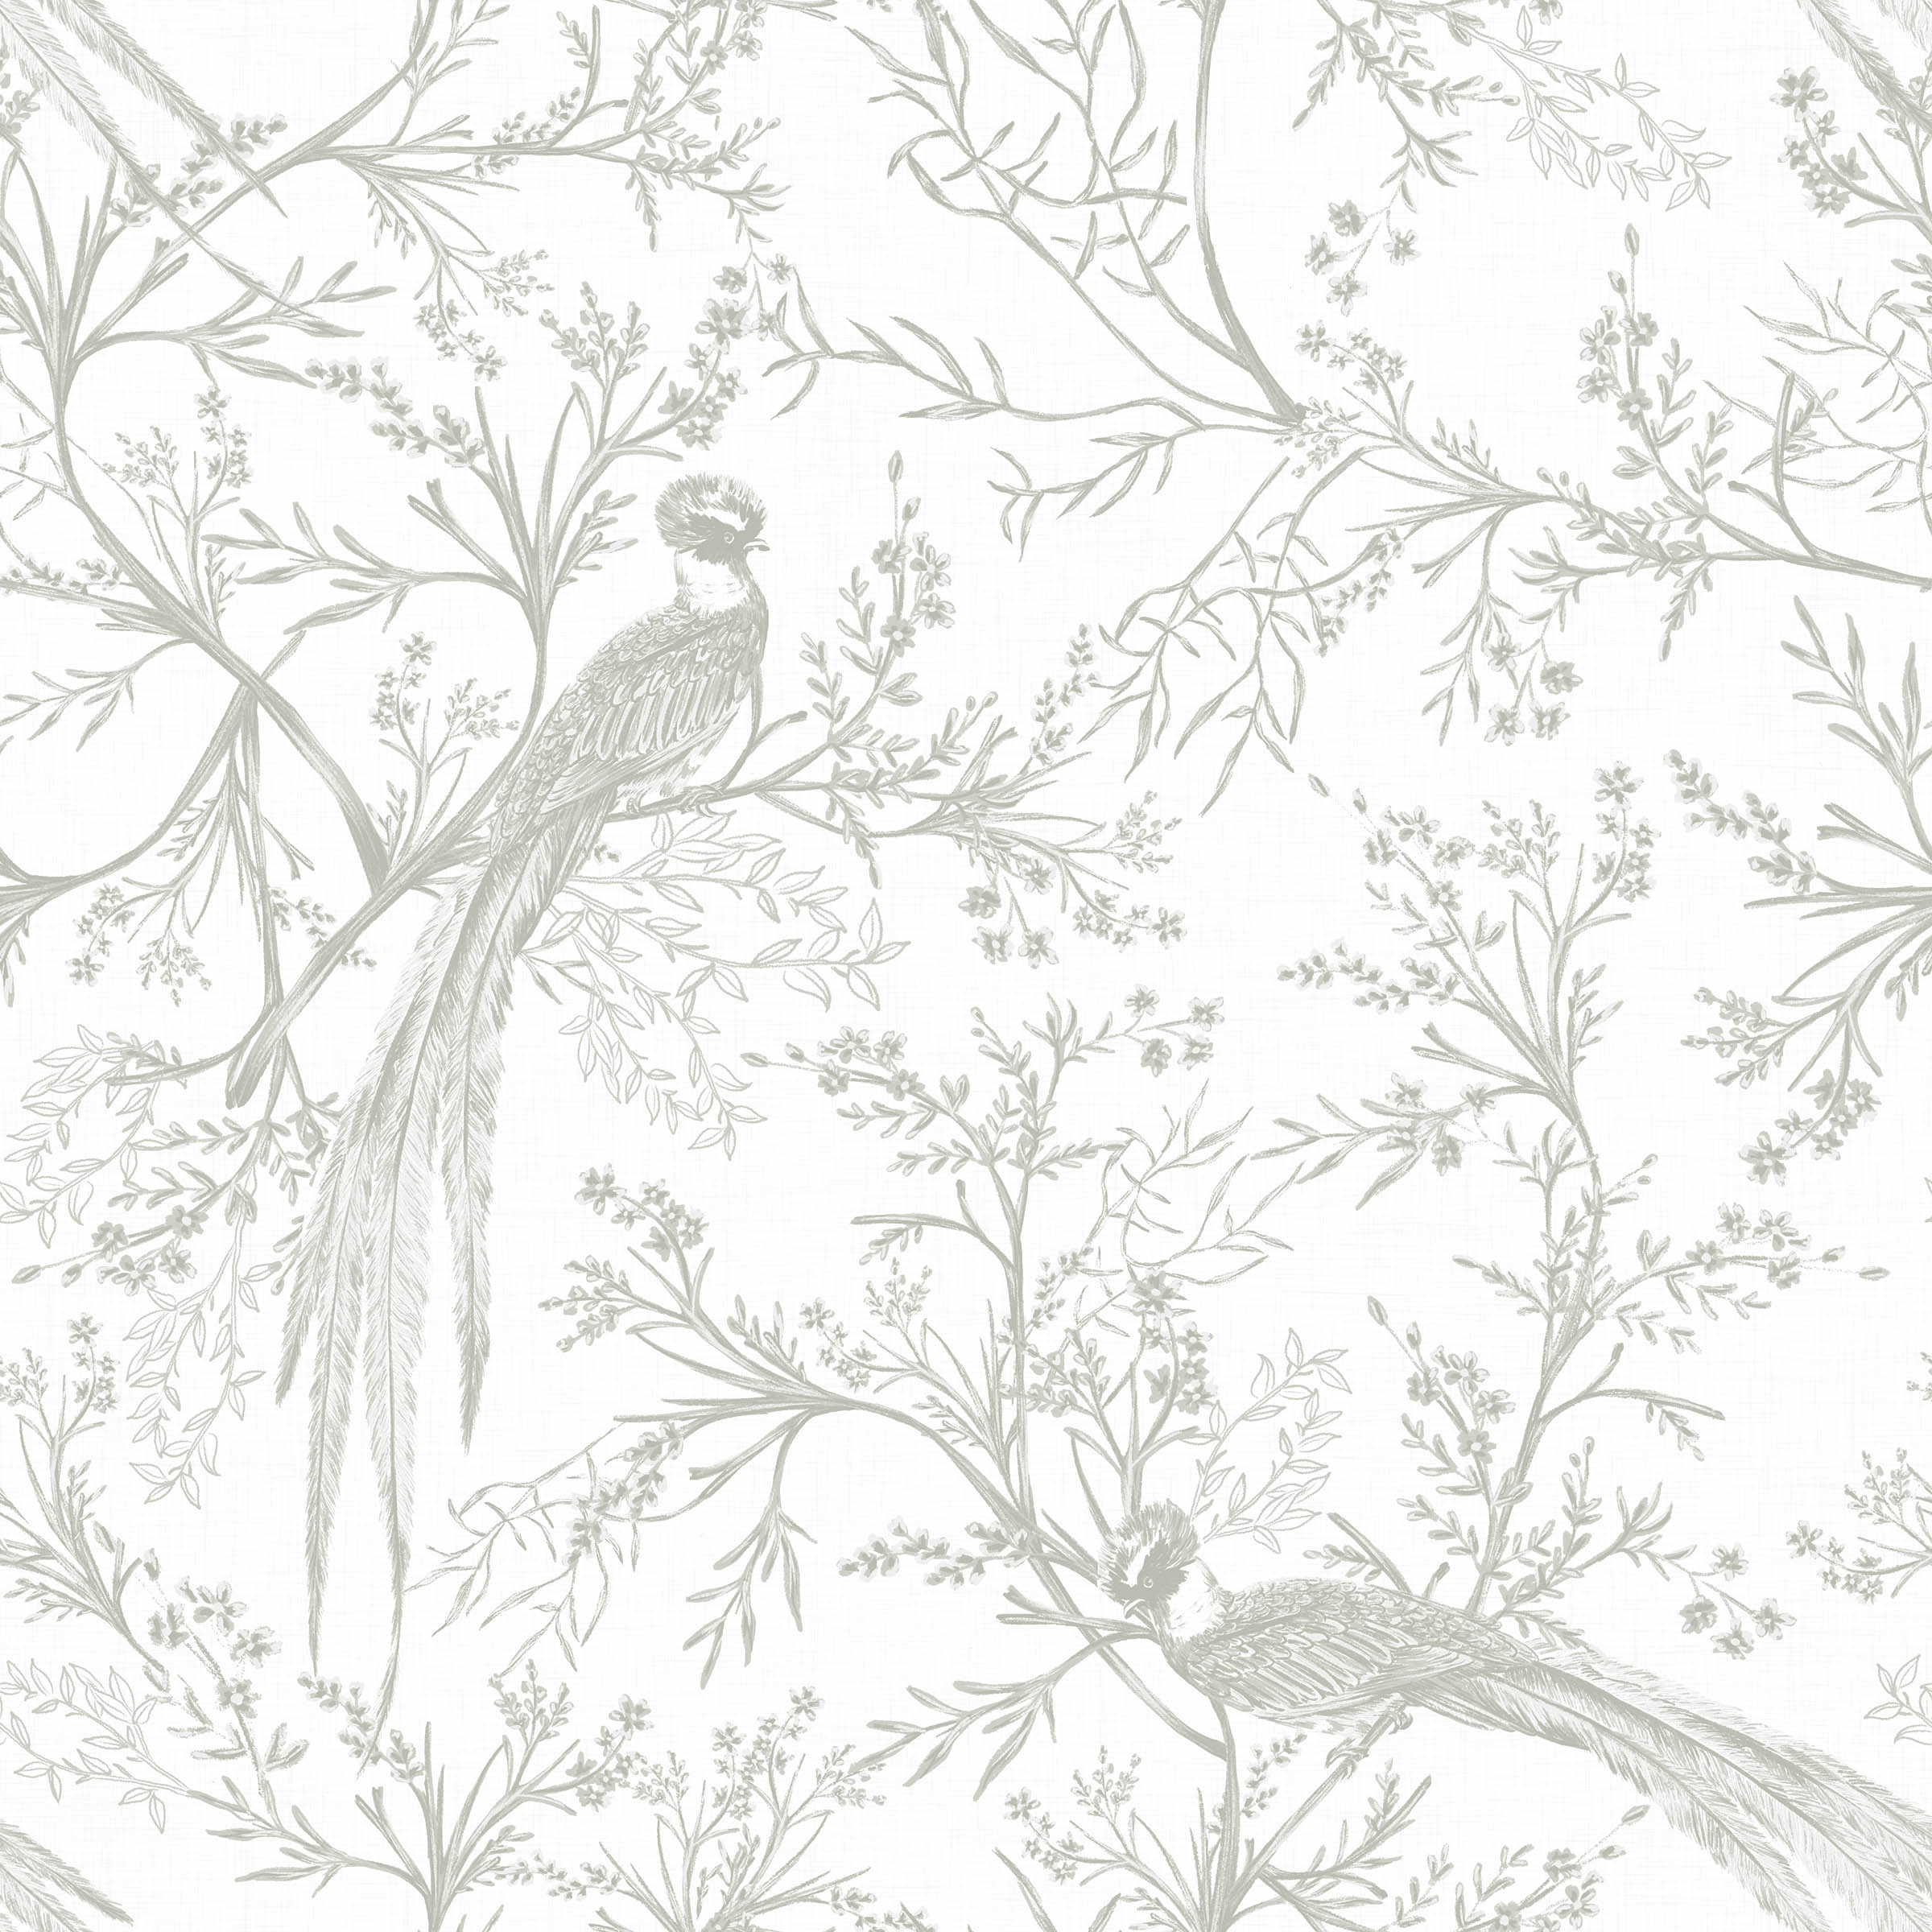 A close-up of the Oriental Garden Wallpaper highlighting its intricate botanical and bird design in soft gray on a white background. The detailed artwork showcases birds amidst delicate branches and foliage, evoking a serene and artistic atmosphere.